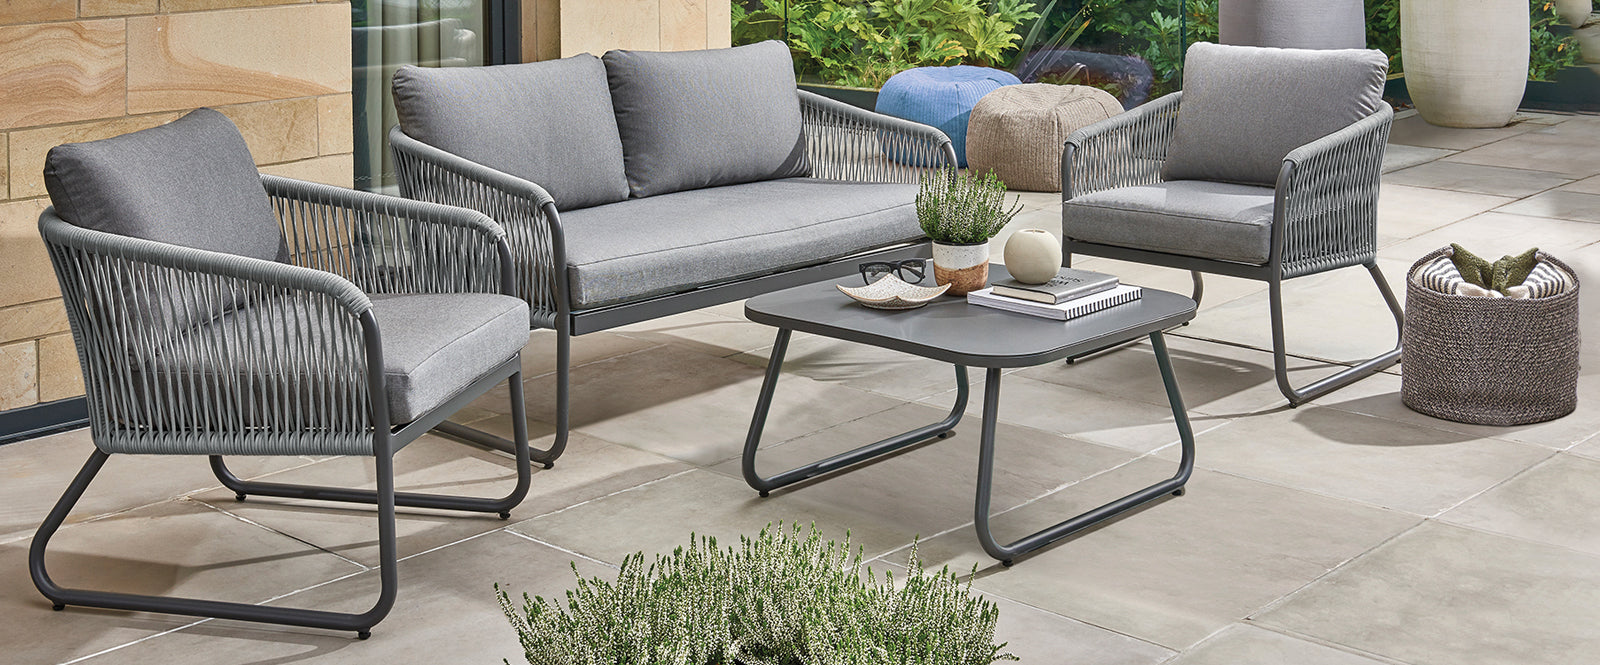 Compact, yet big on comfort, style and quality. Kingston Lounge Set.